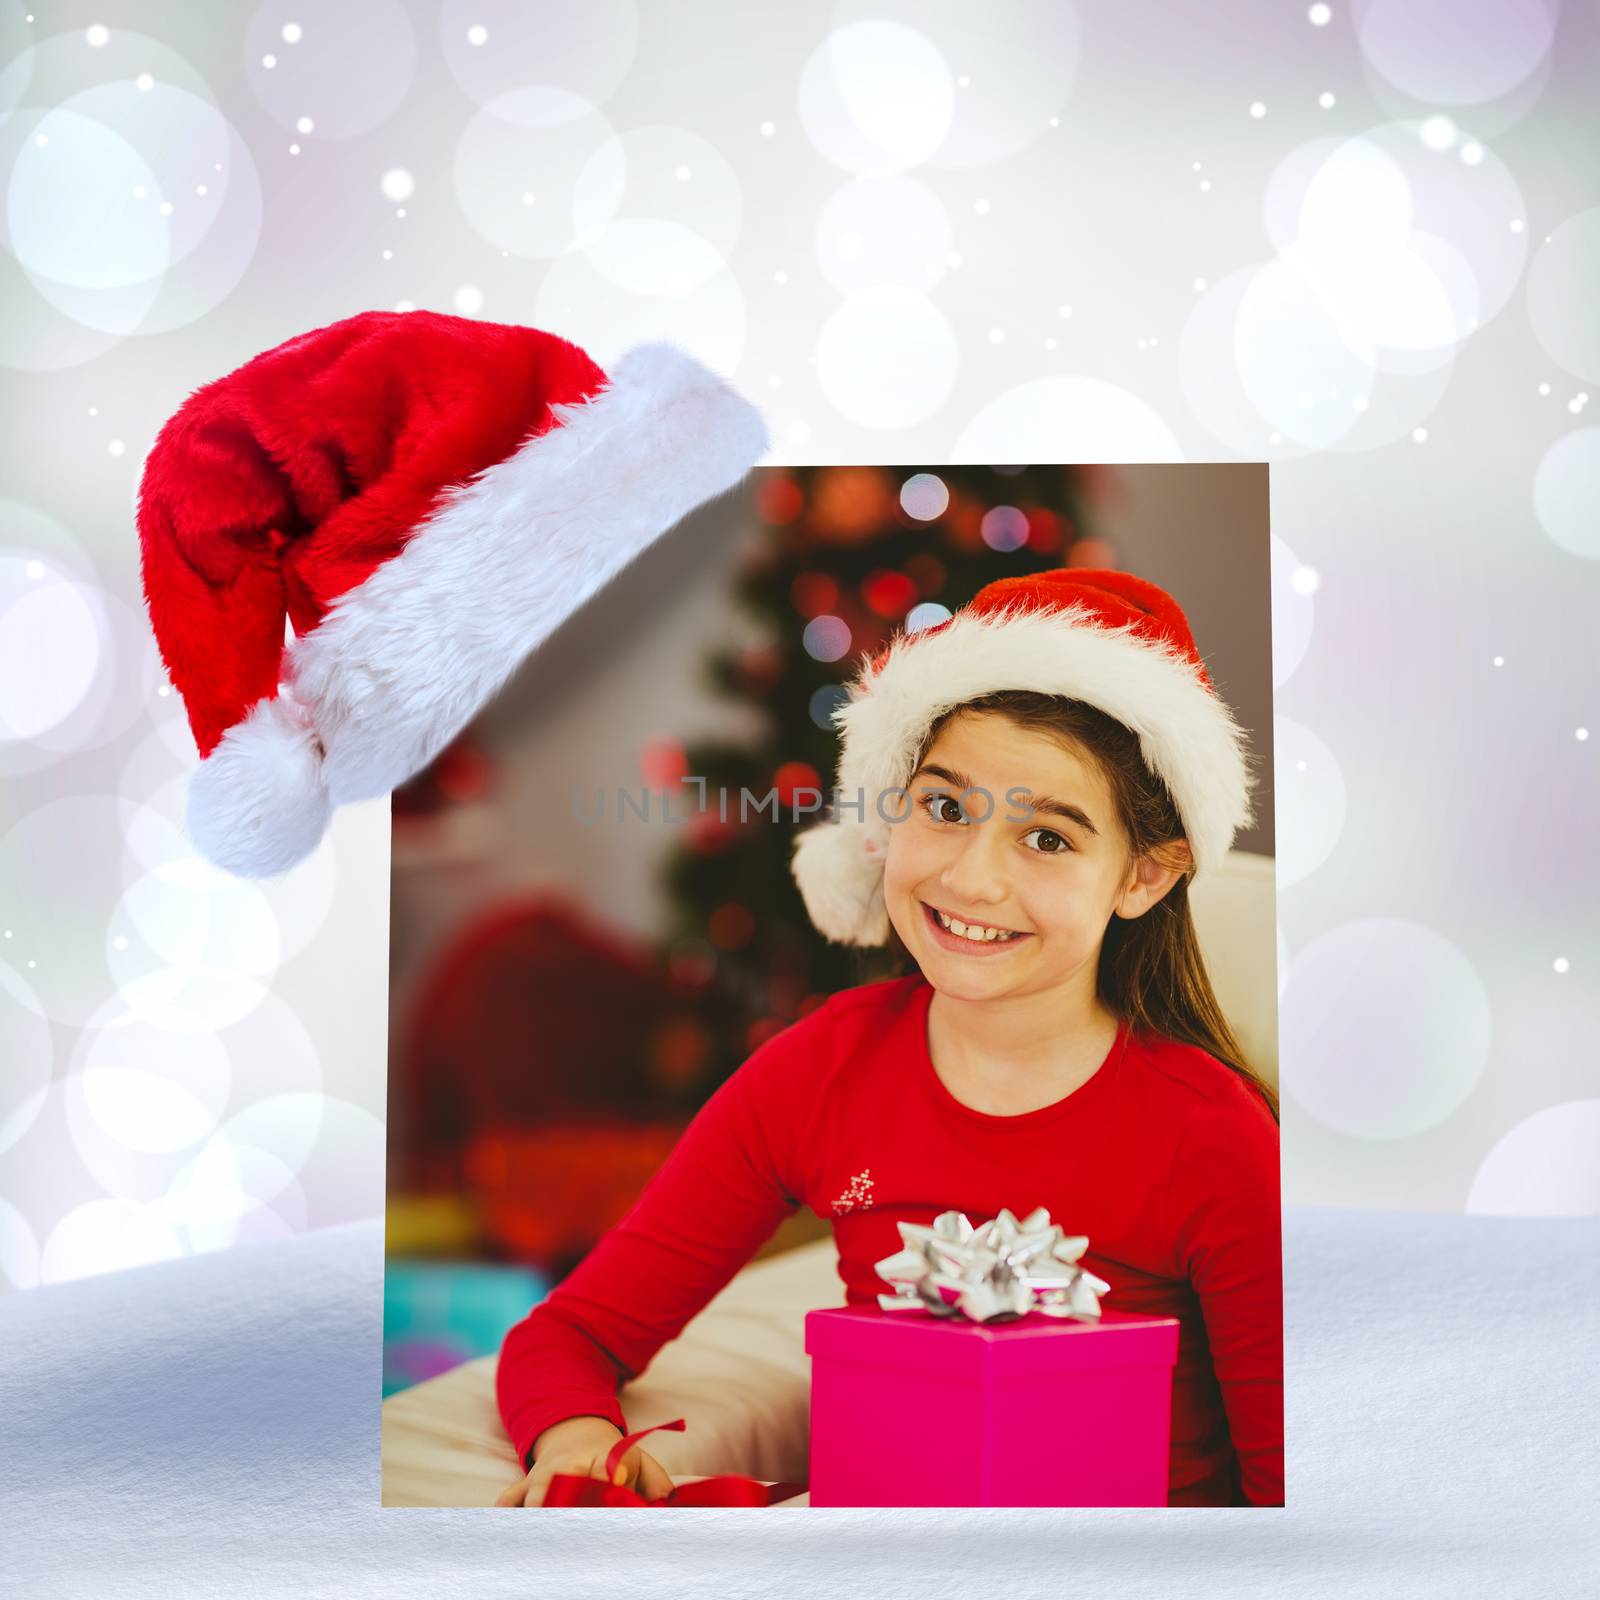 Festive little girl smiling at camera with gifts against purple abstract light spot design